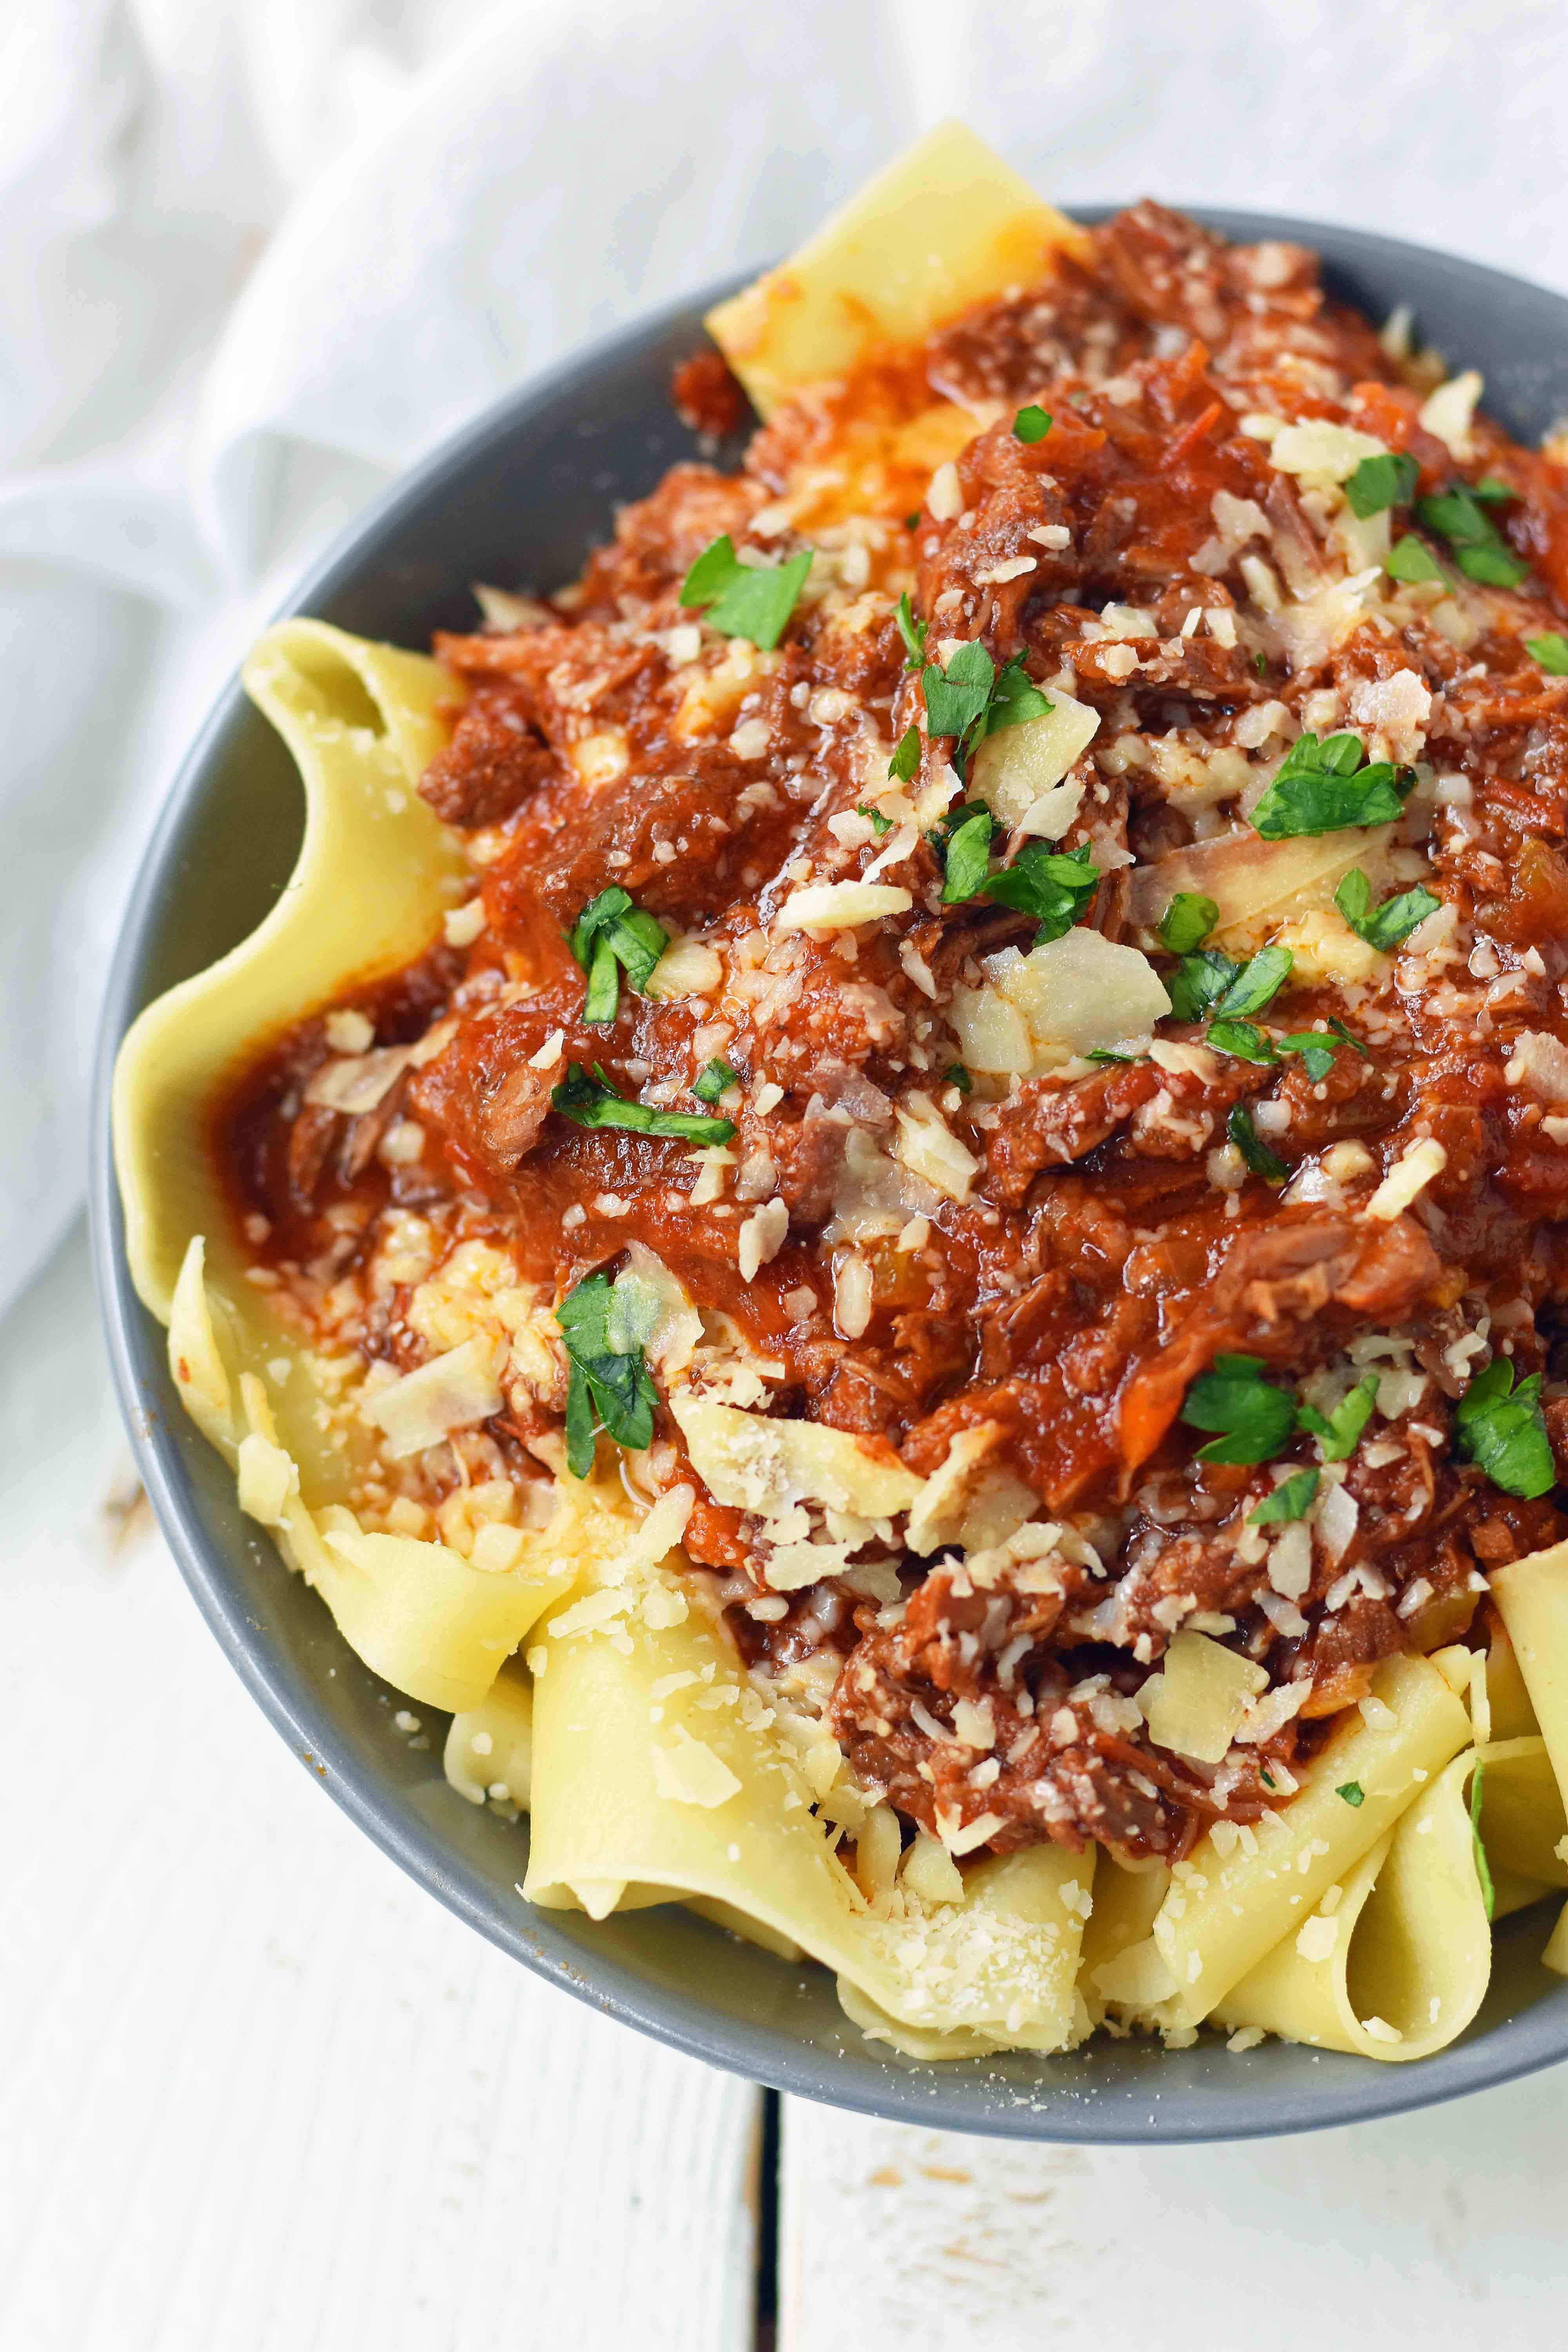 This braised shredded beef ragu with pappardelle pasta can be made in a slow cooker or instant pot pressure cooker. It makes the most tender, flavorful beef in a rich, velvety sauce. It is the ultimate comfort meal in a bowl! This Beef Ragu can be put on top of spiralized vegetables, mashed potatoes, or polenta for a gluten-free dinner. www.modernhoney.com 